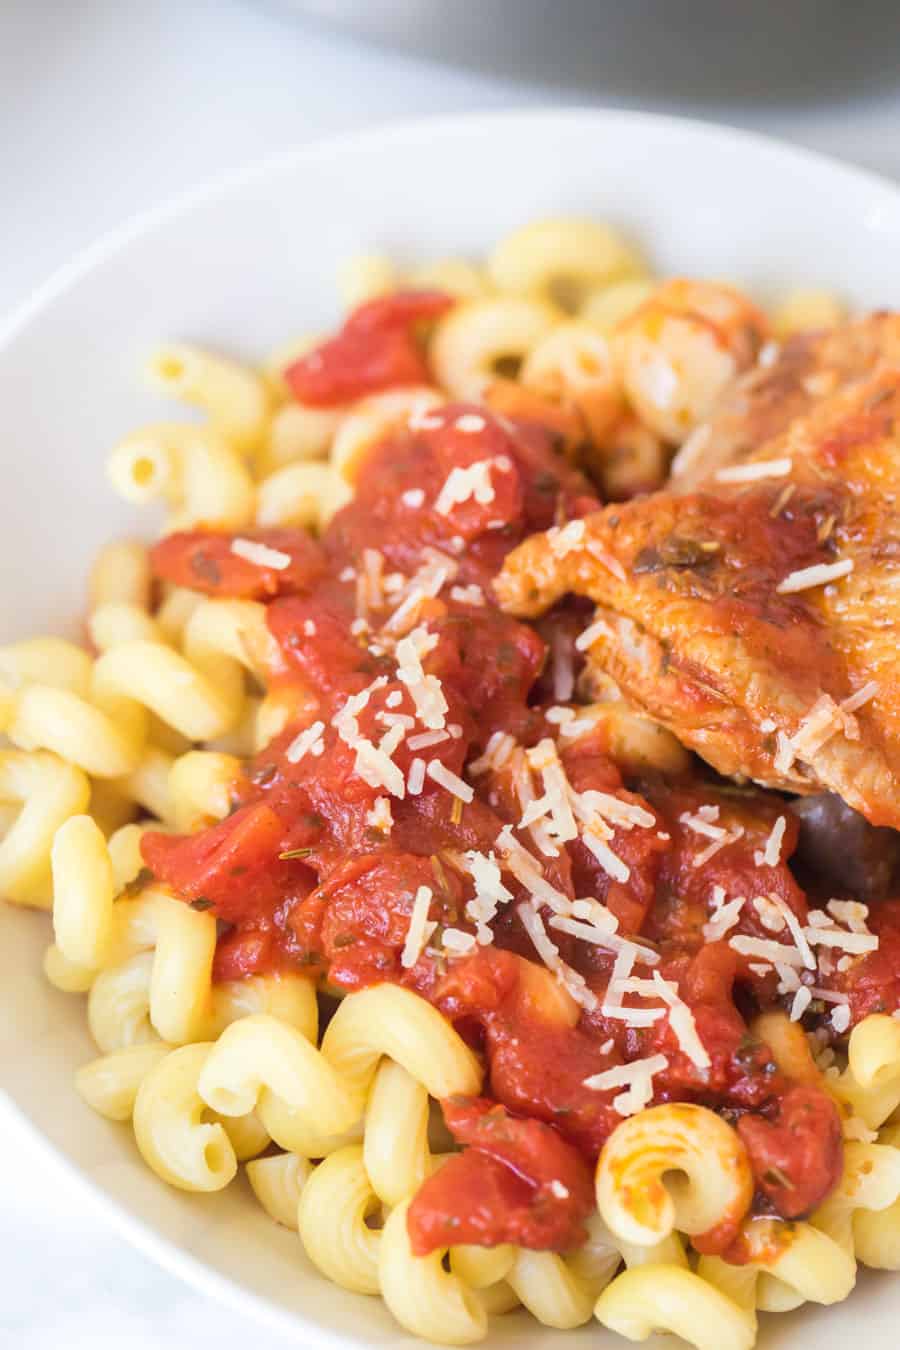 tomato and garlic pasta with chicken thigh in white bowl